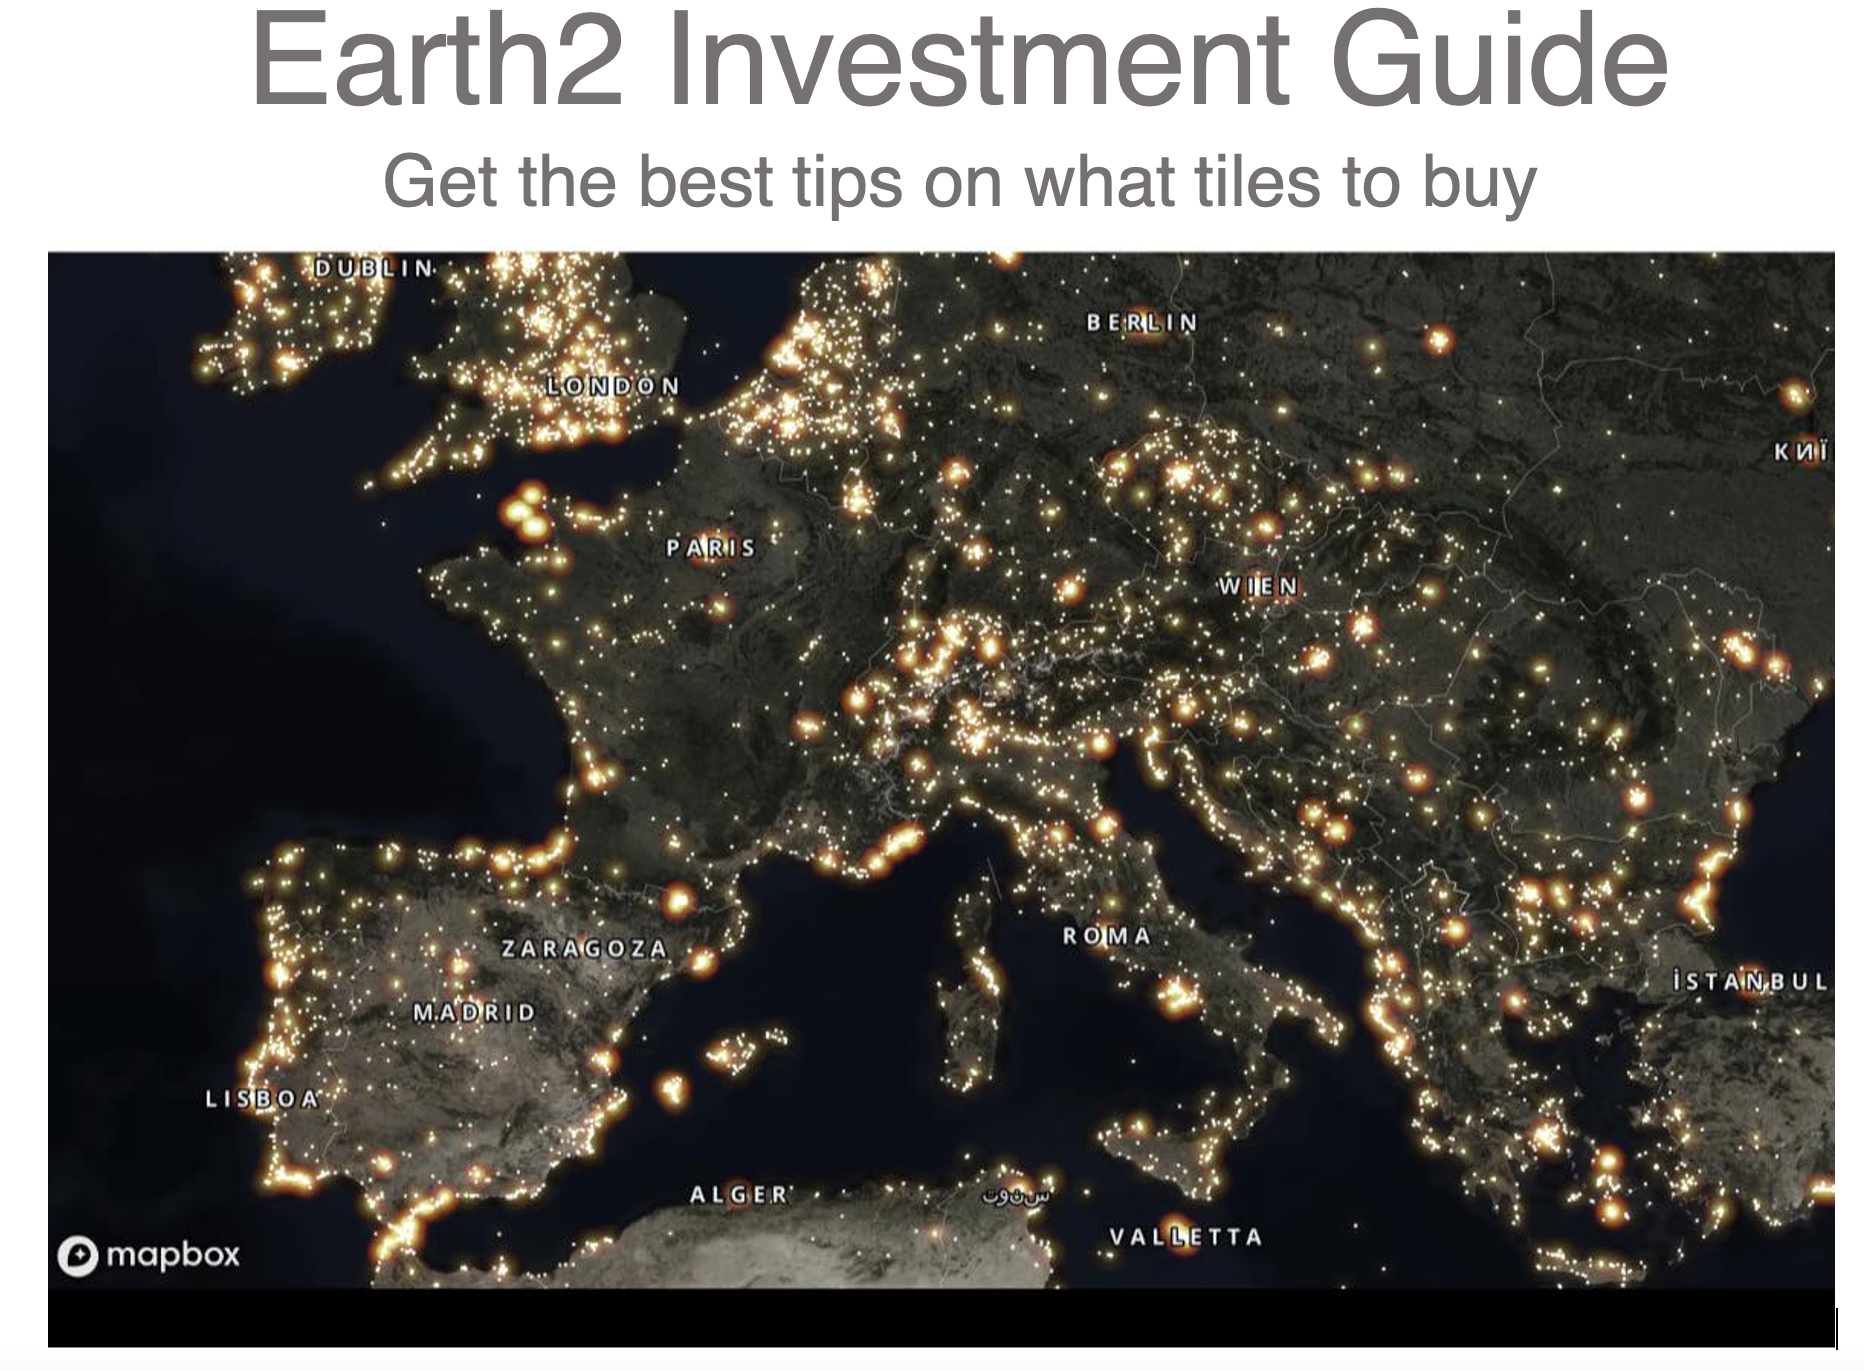 Earth2 Investment Guide - Best tips